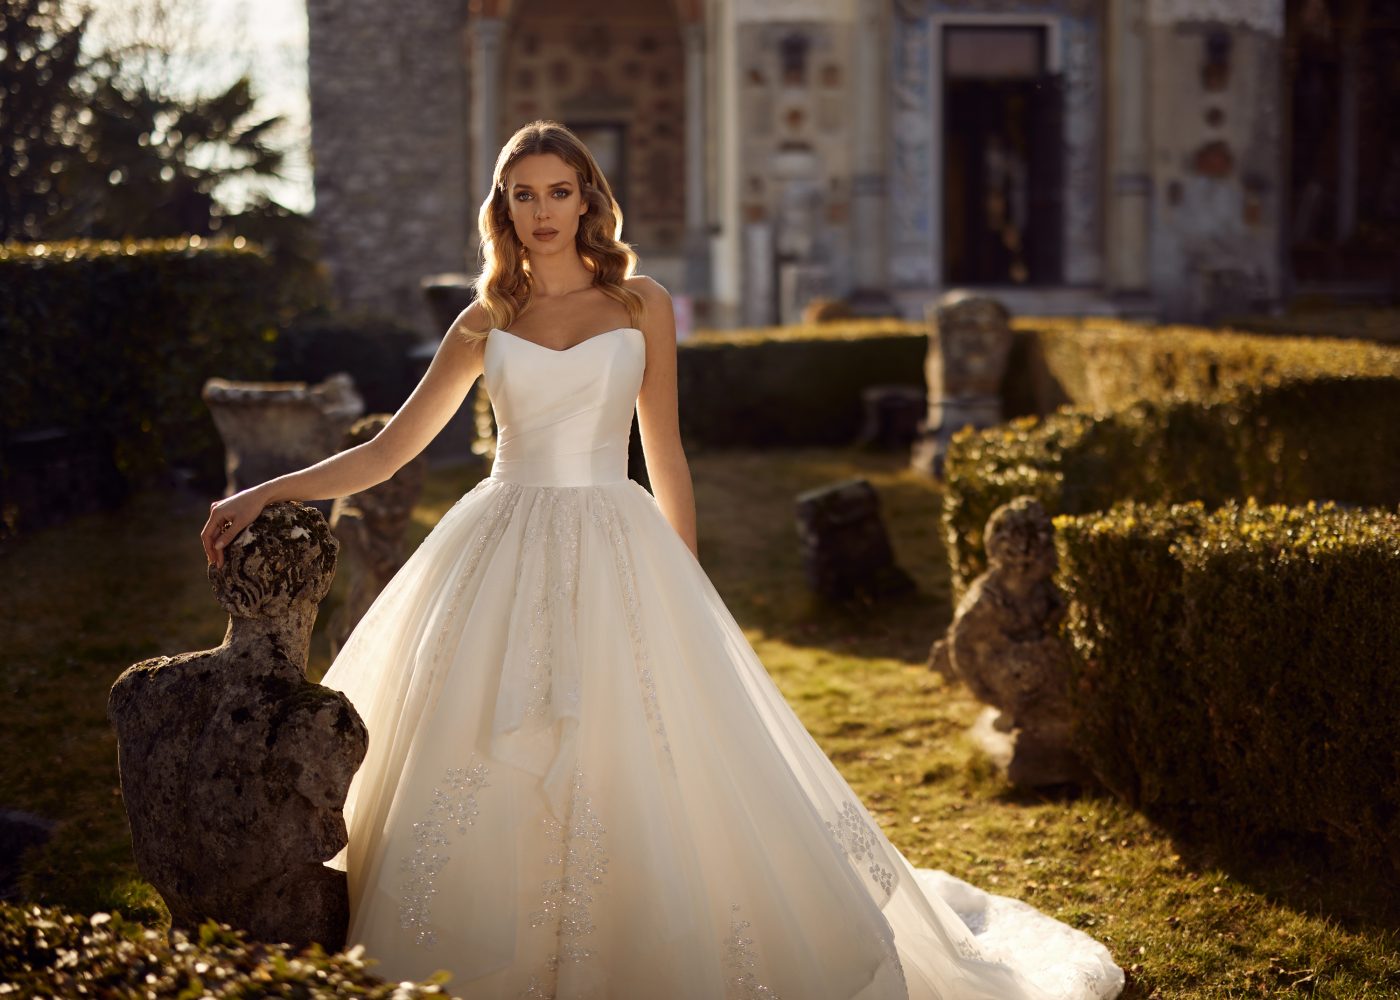 New York Bridal Designers - Where To Buy Wedding Gowns